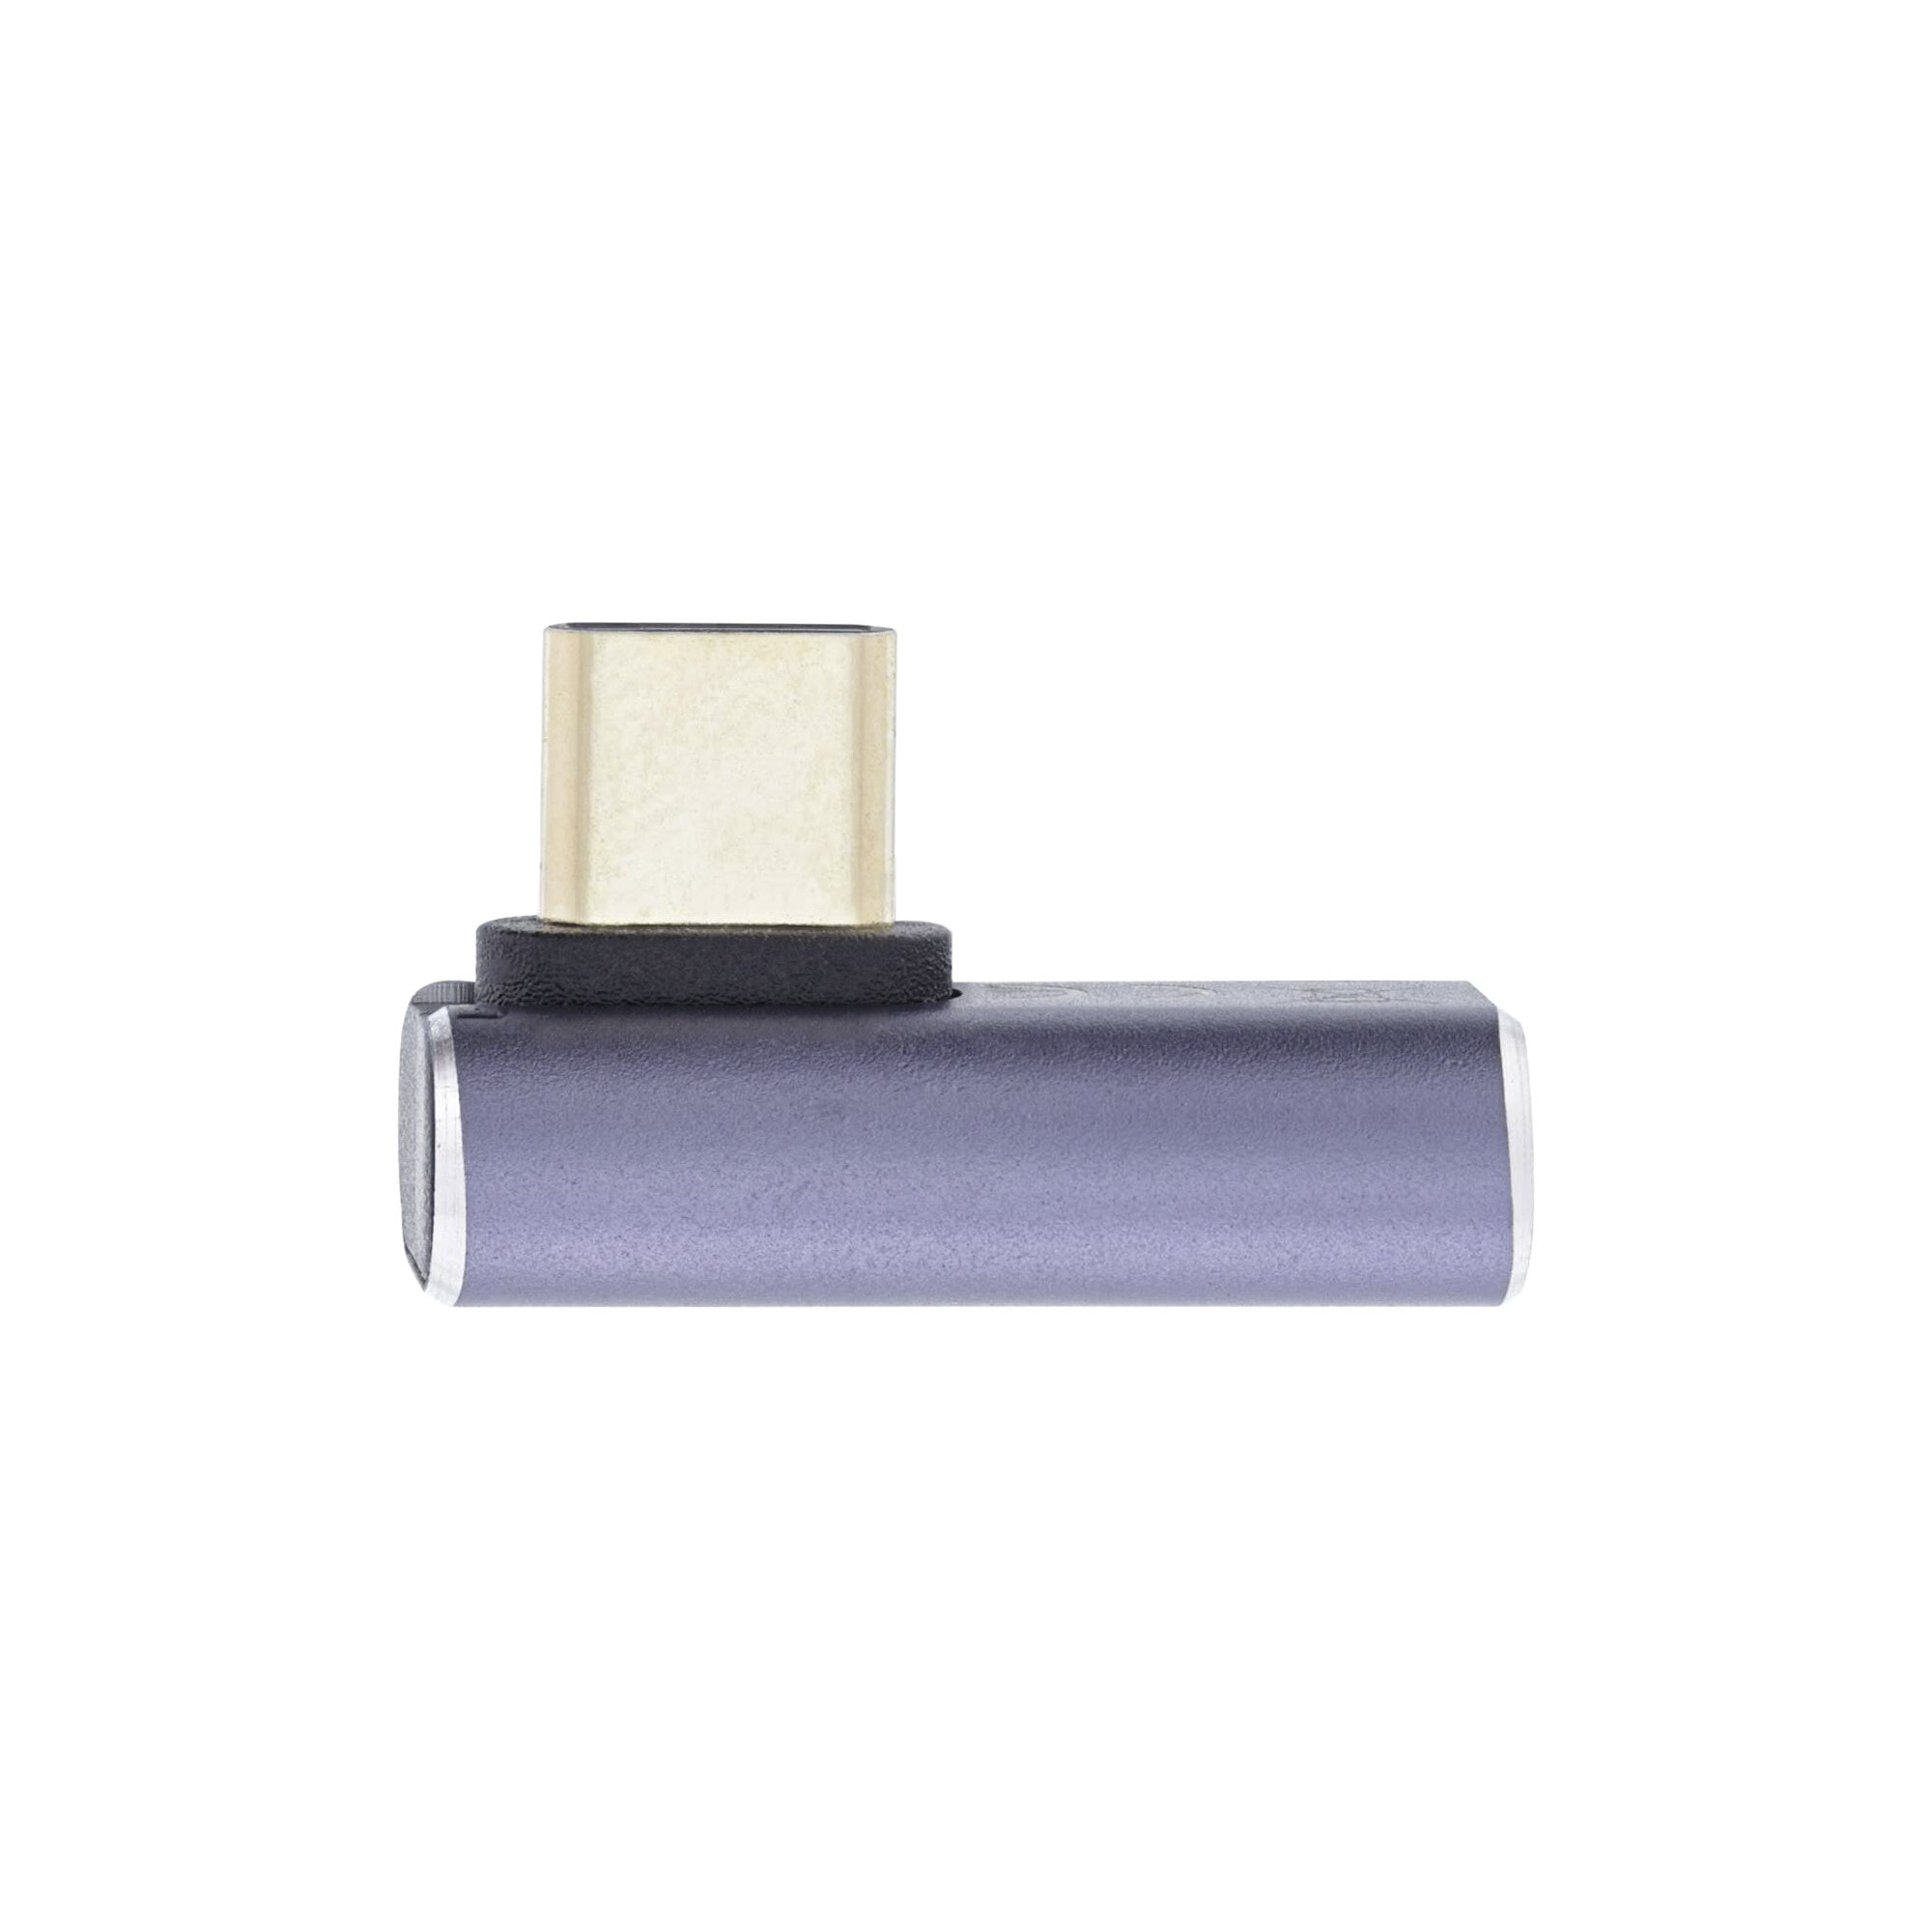 InLine USB4 Adapter - USB Type-C male/female vertical right/left angled - USB Type-C - USB Type-C - Grey